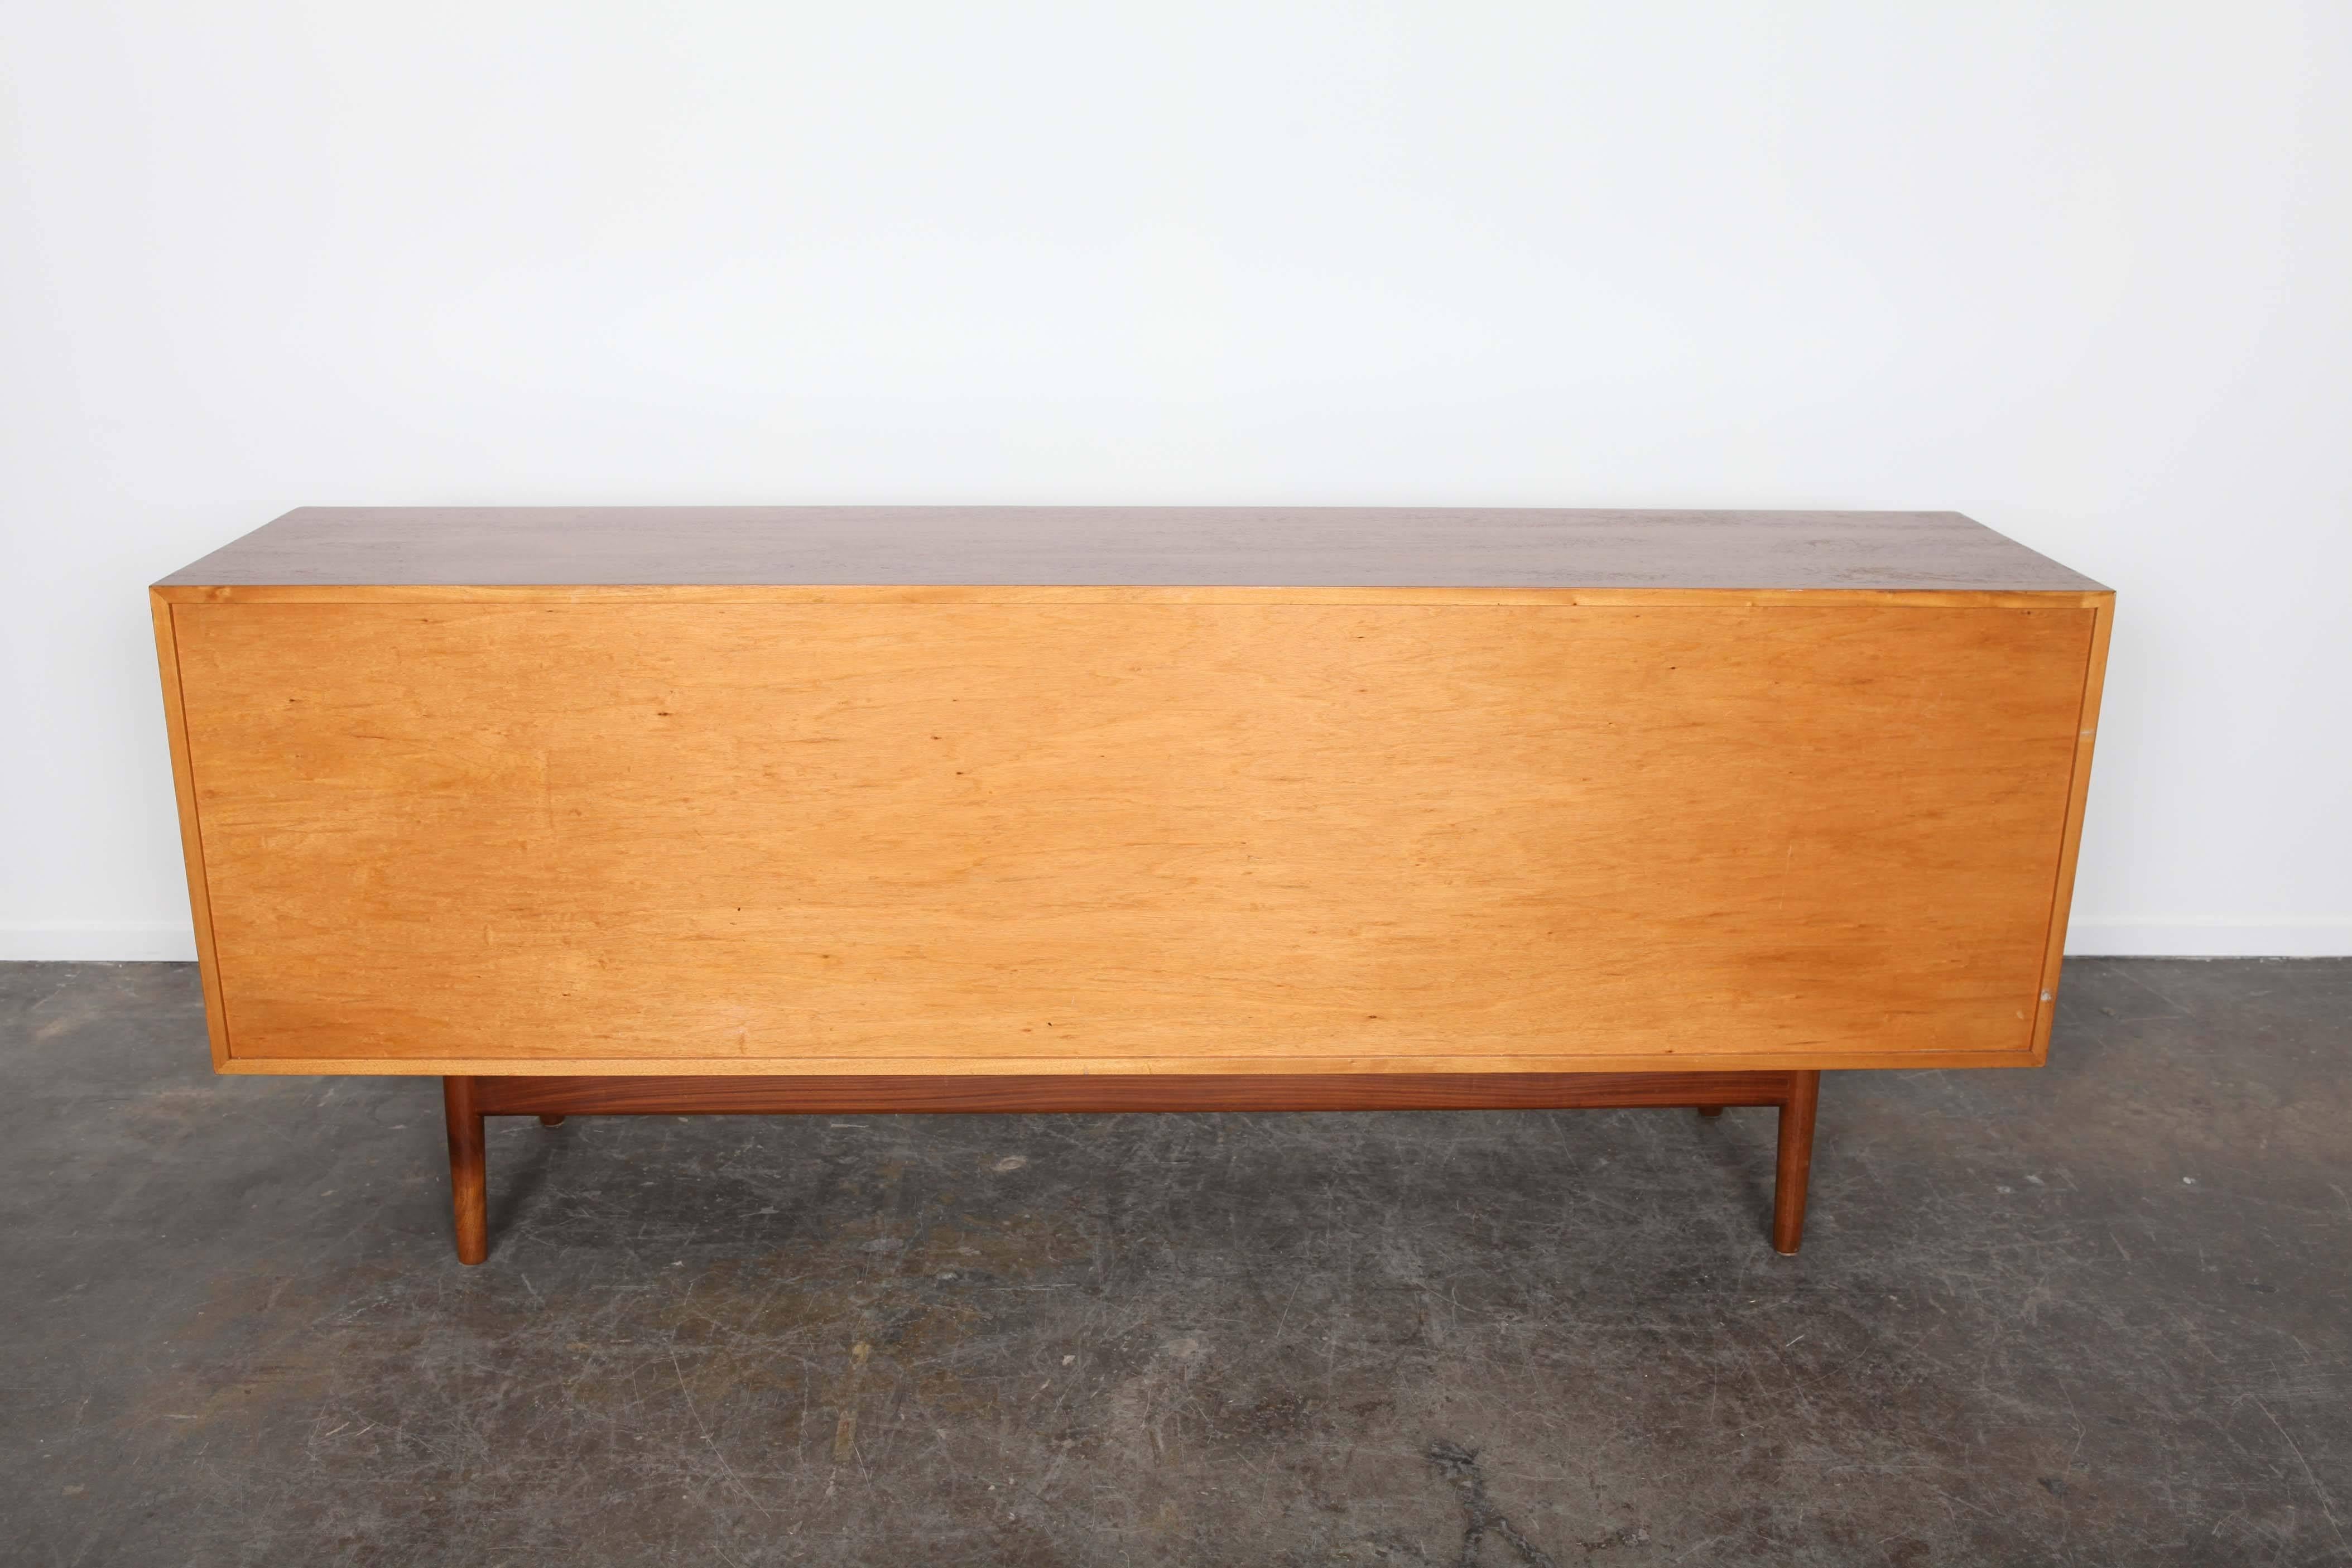 Mid-20th Century Four-Drawer Teak Sidboard by Dalescraft Furniture Co. of Yorkshire, England